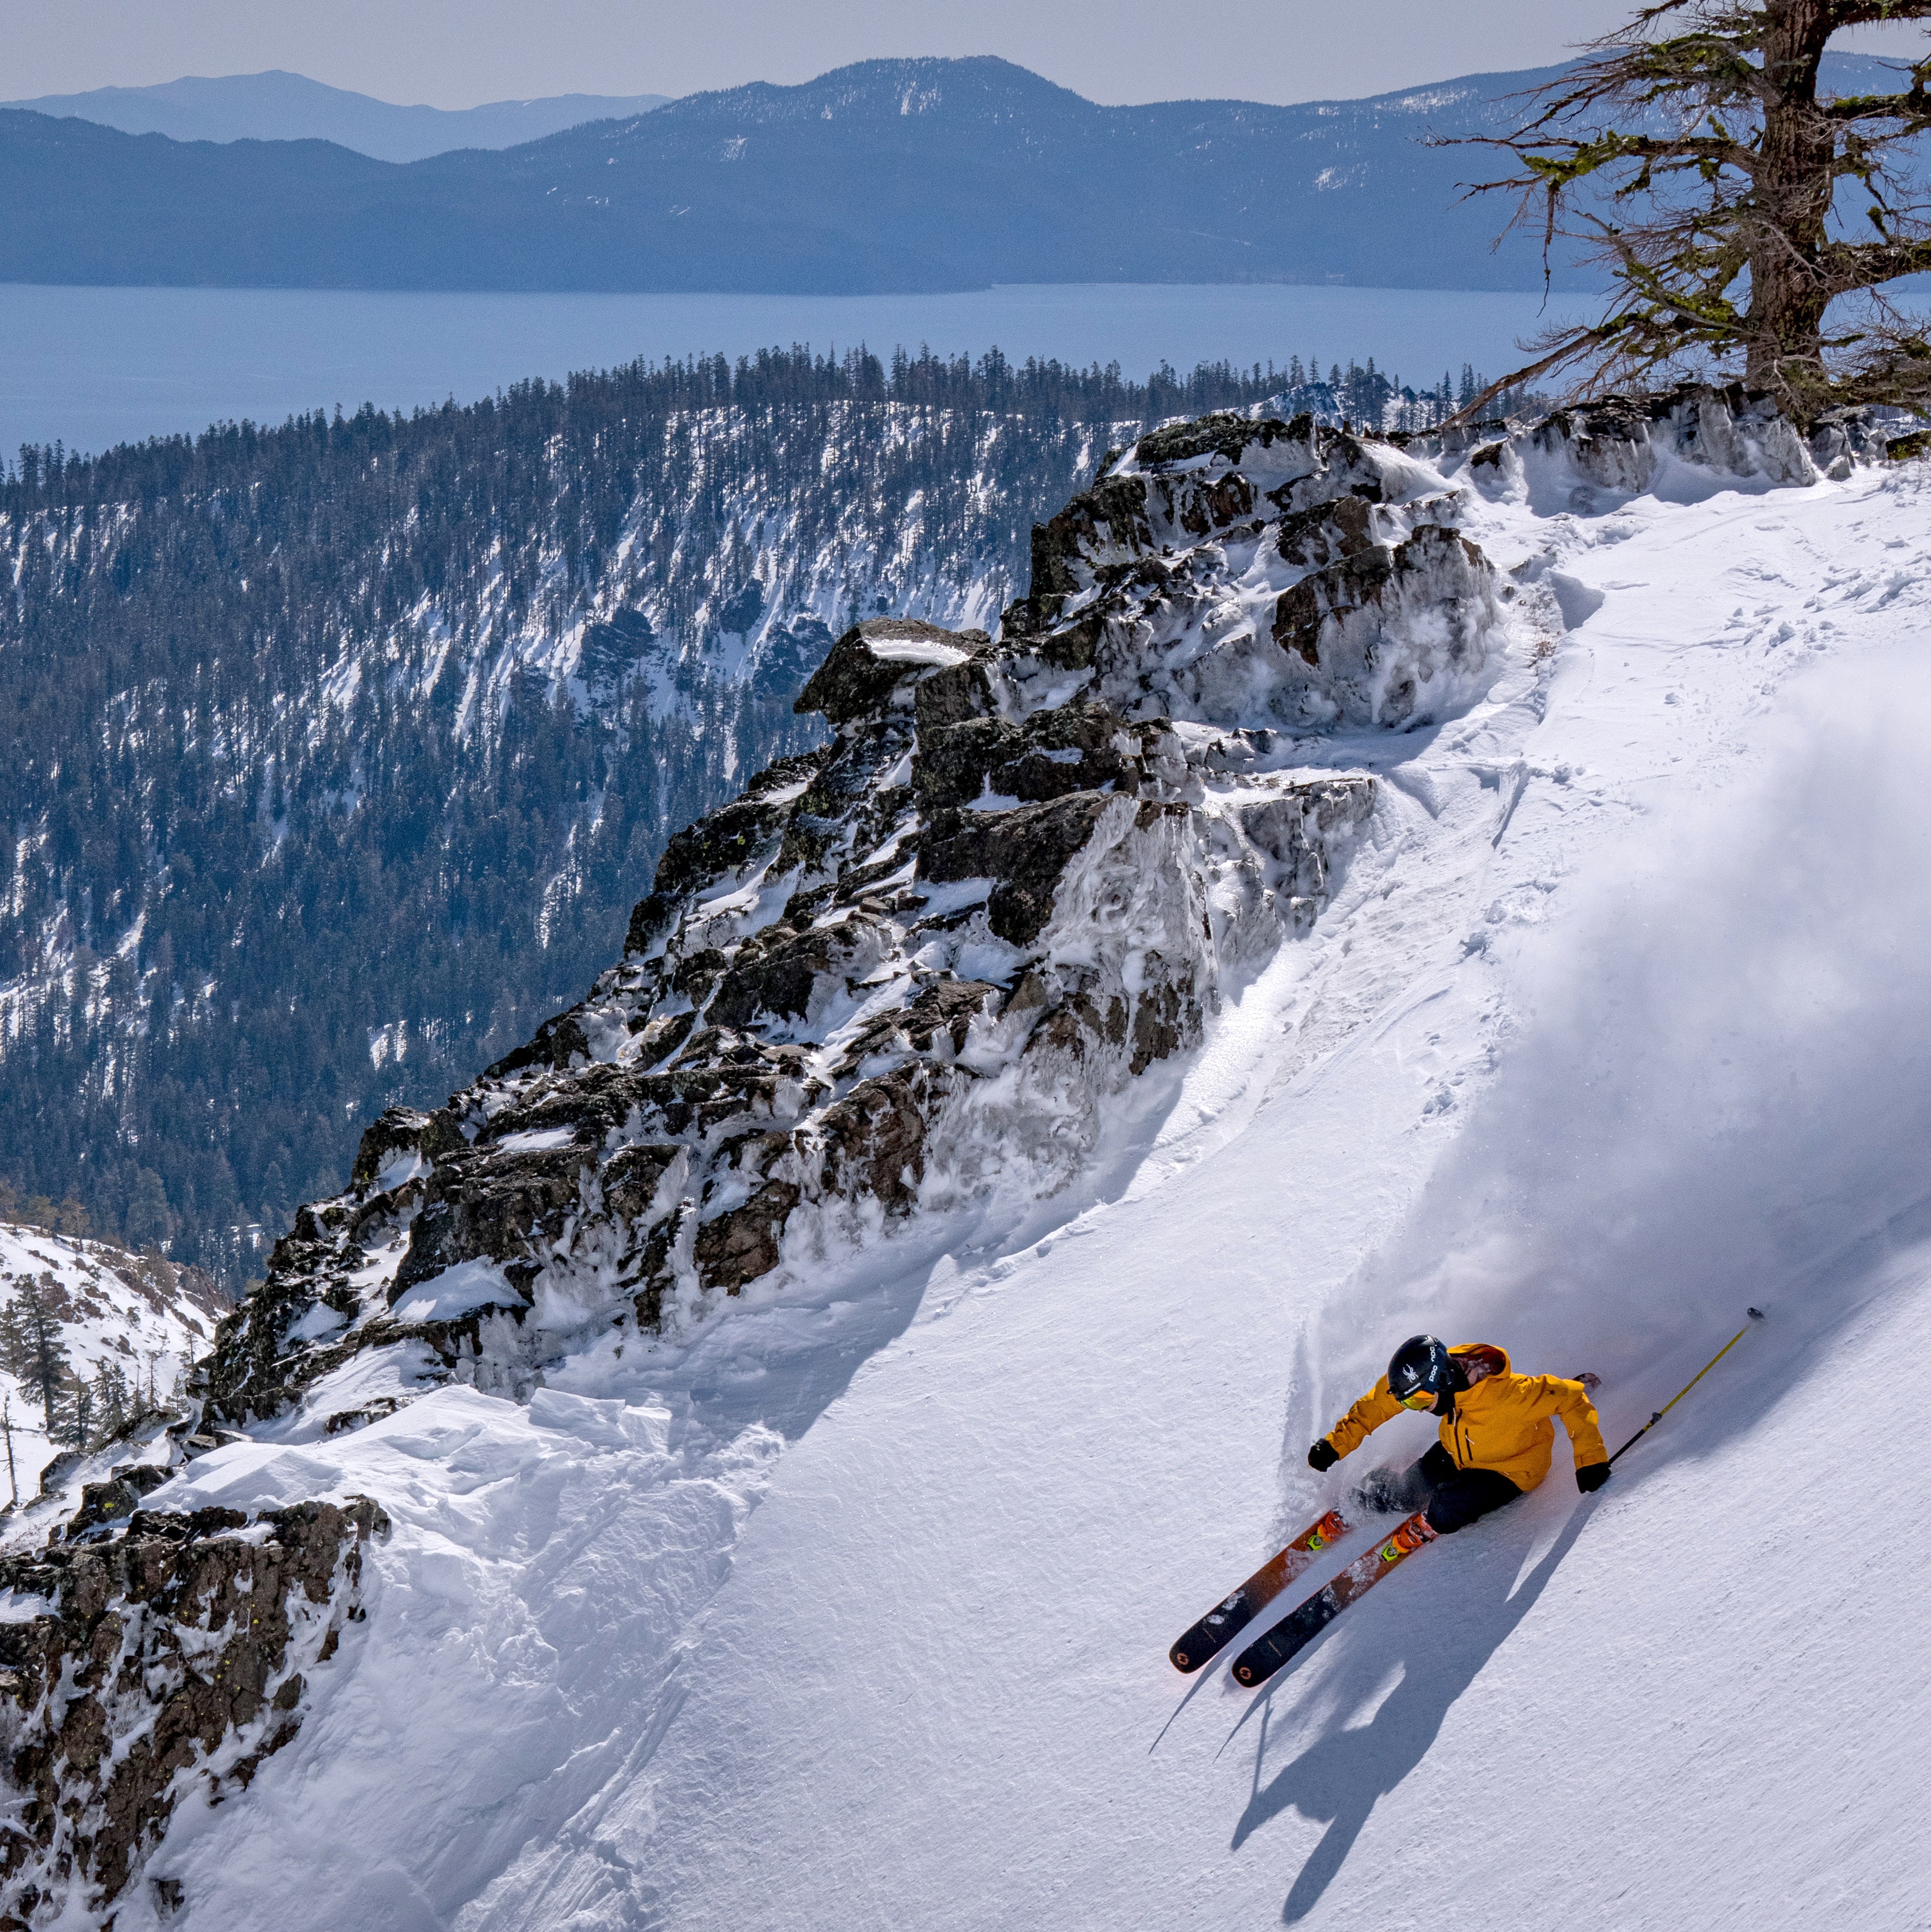 Skiers enjoying the slopes at Squaw Valley Alpine Meadows, Lake Tahoe